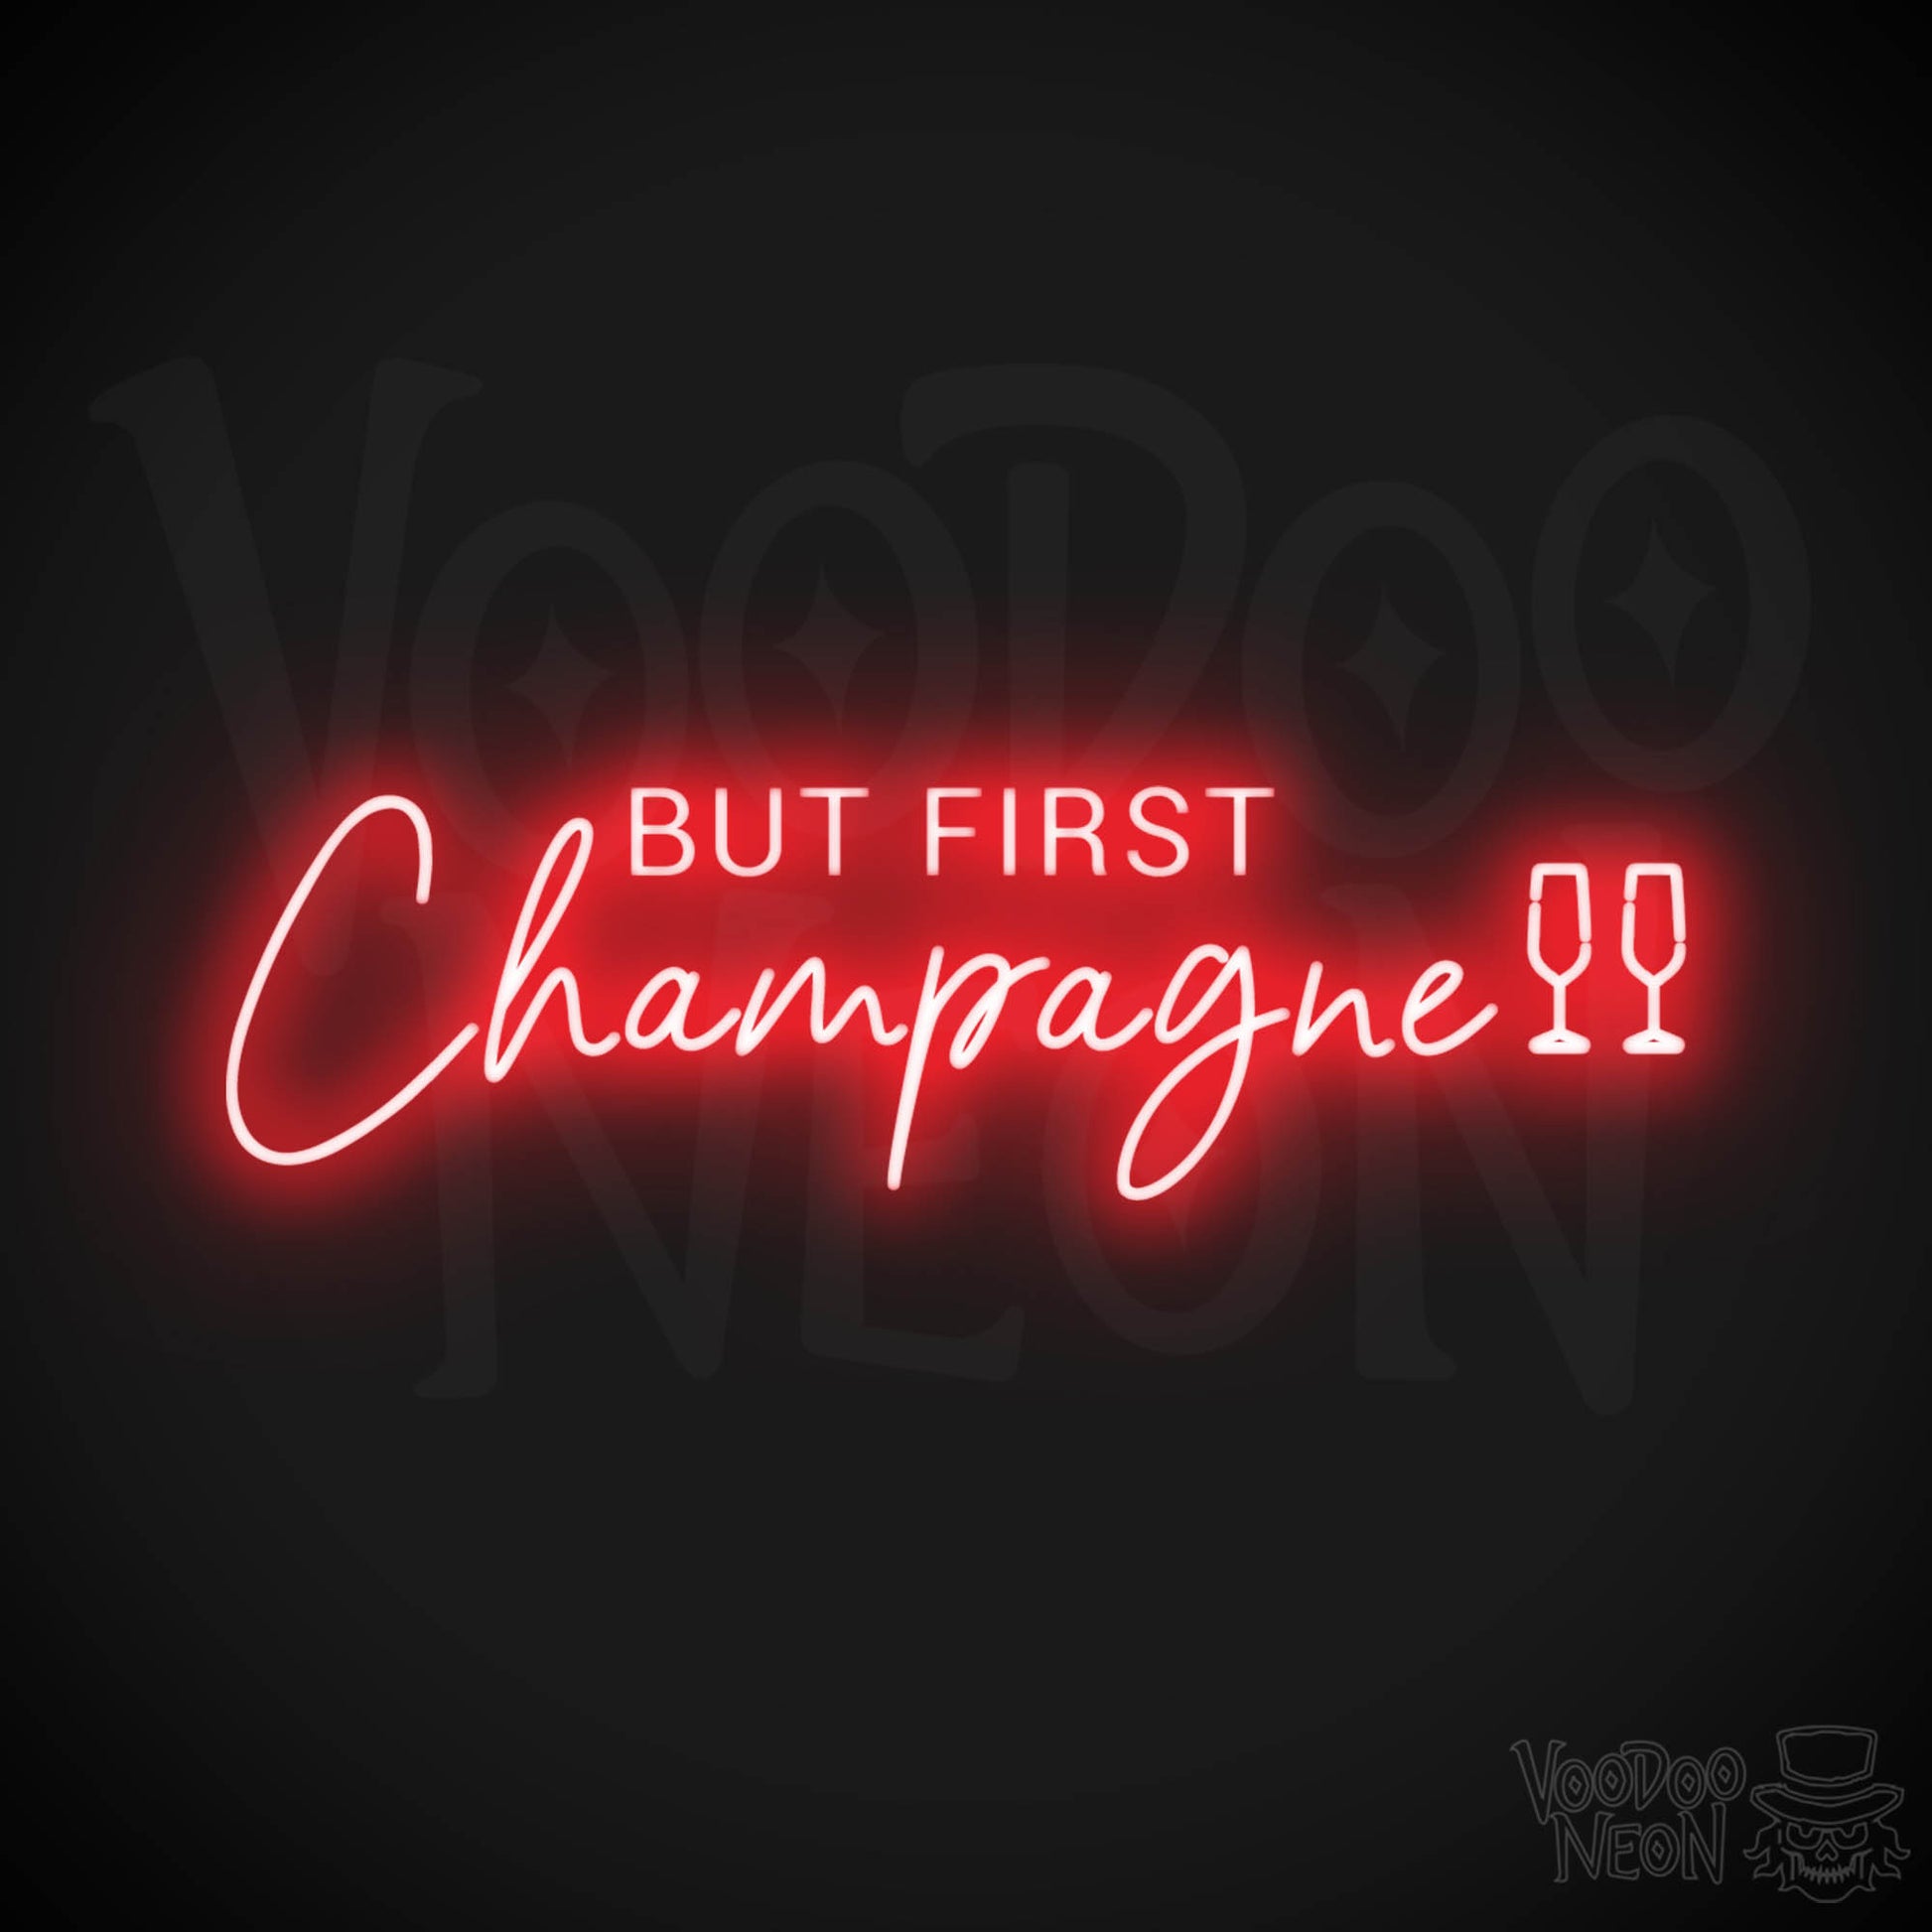 But First Champagne Neon Sign - Neon But First Champagne Sign - Neon Wall Art - Color Red